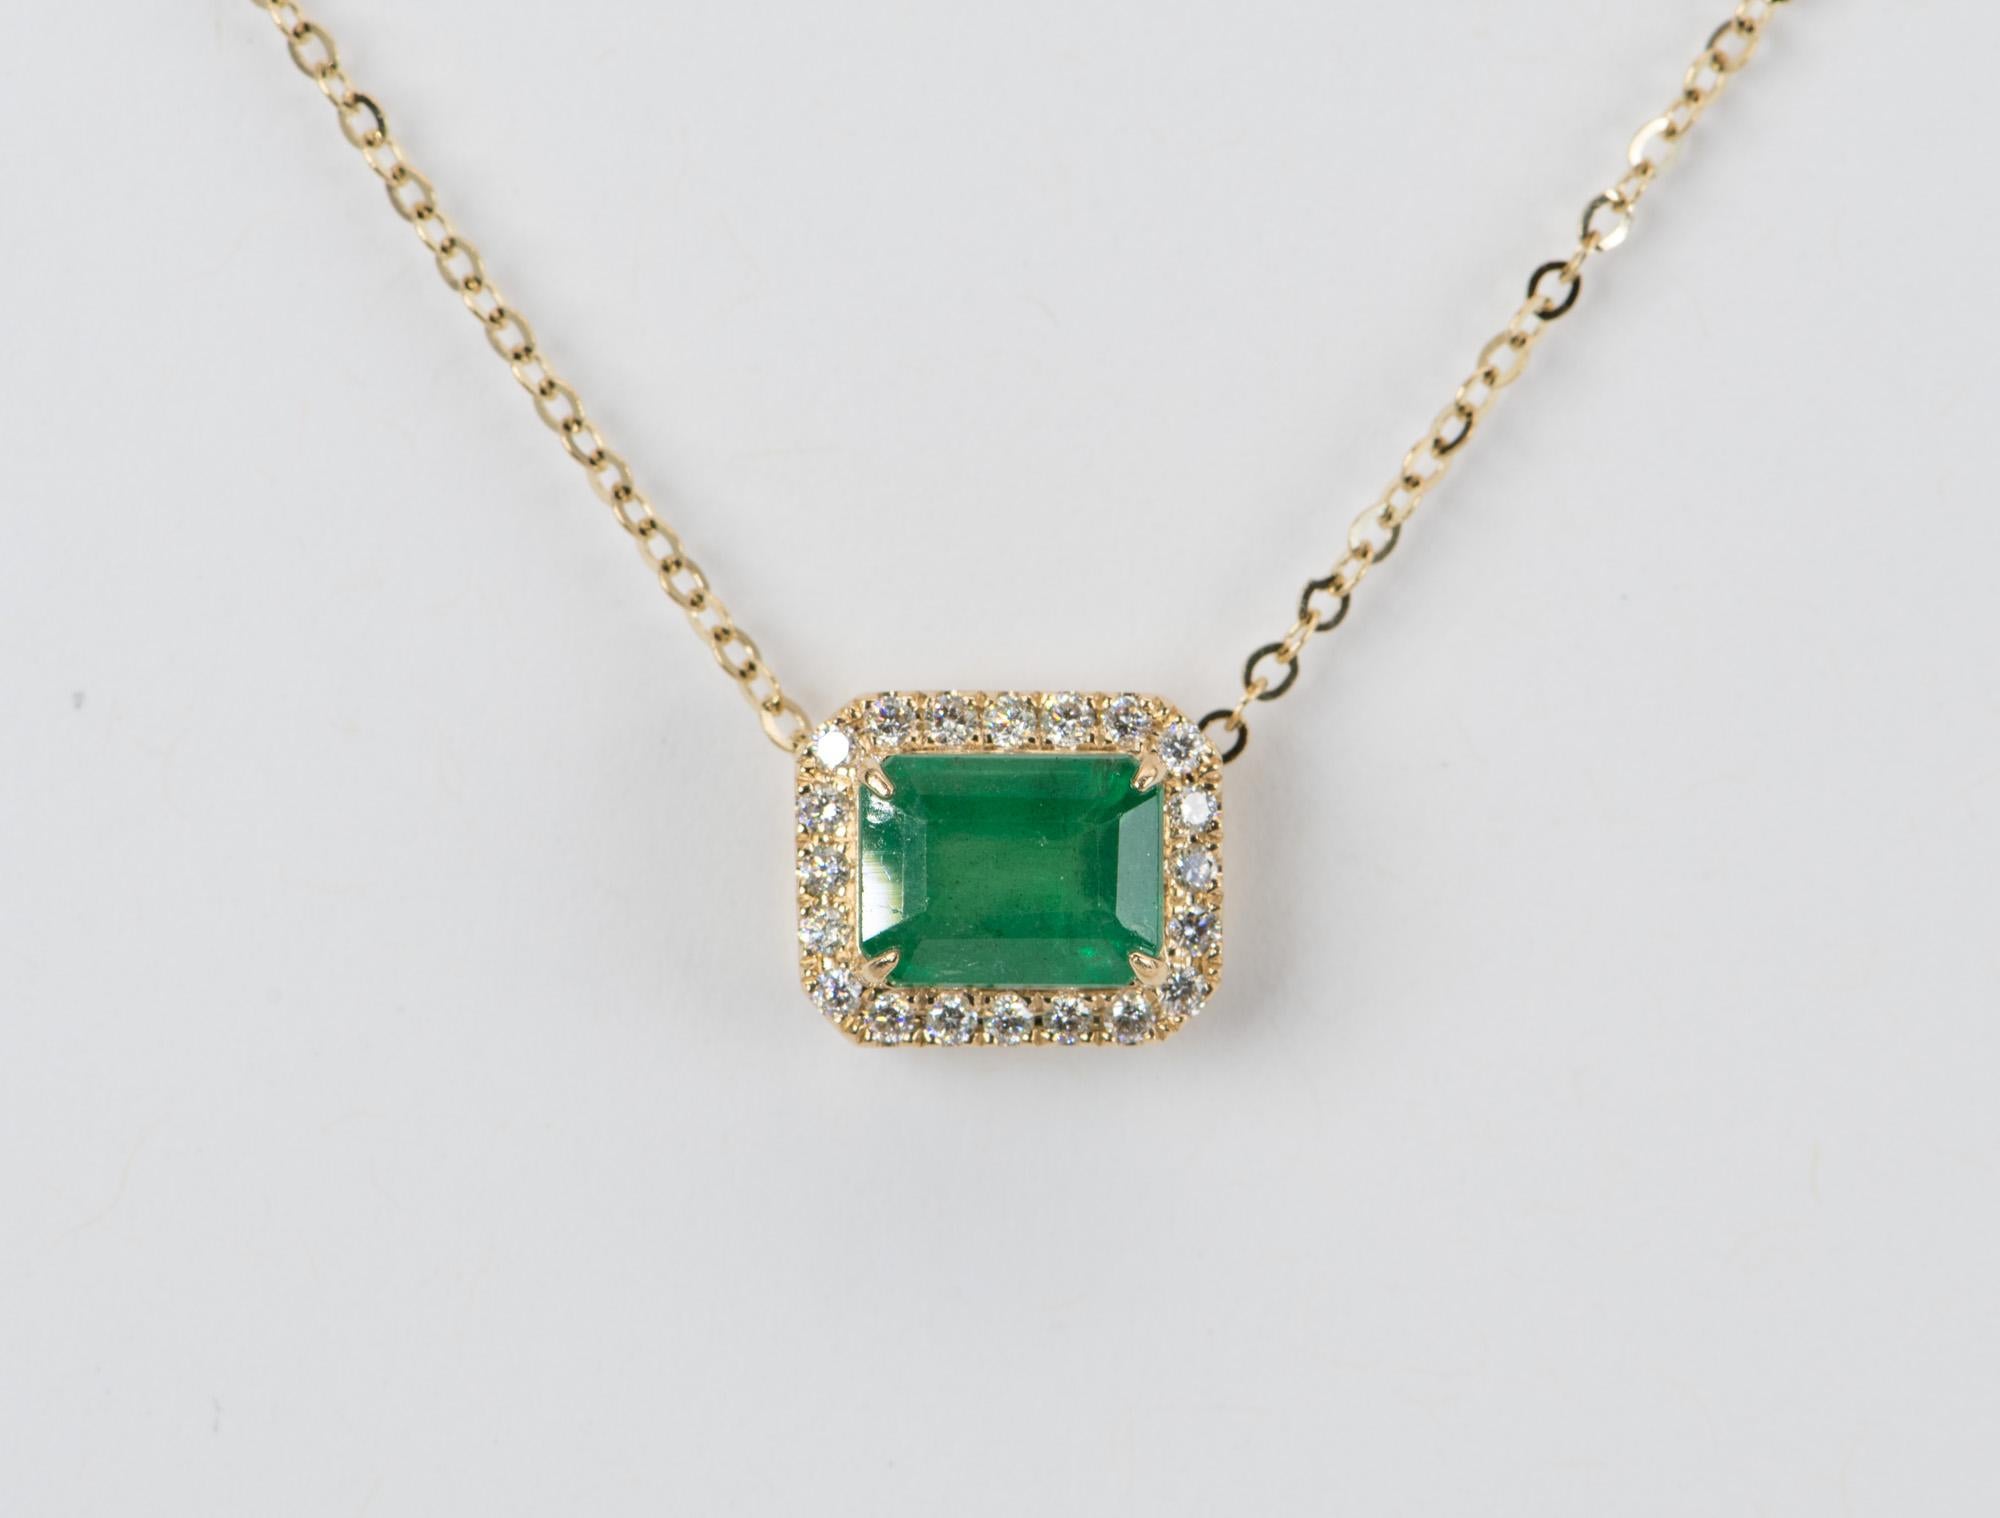 1.74ct Emerald with Diamond Halo 14K Yellow Gold Pendant Necklace Chain R4058 In New Condition For Sale In Osprey, FL